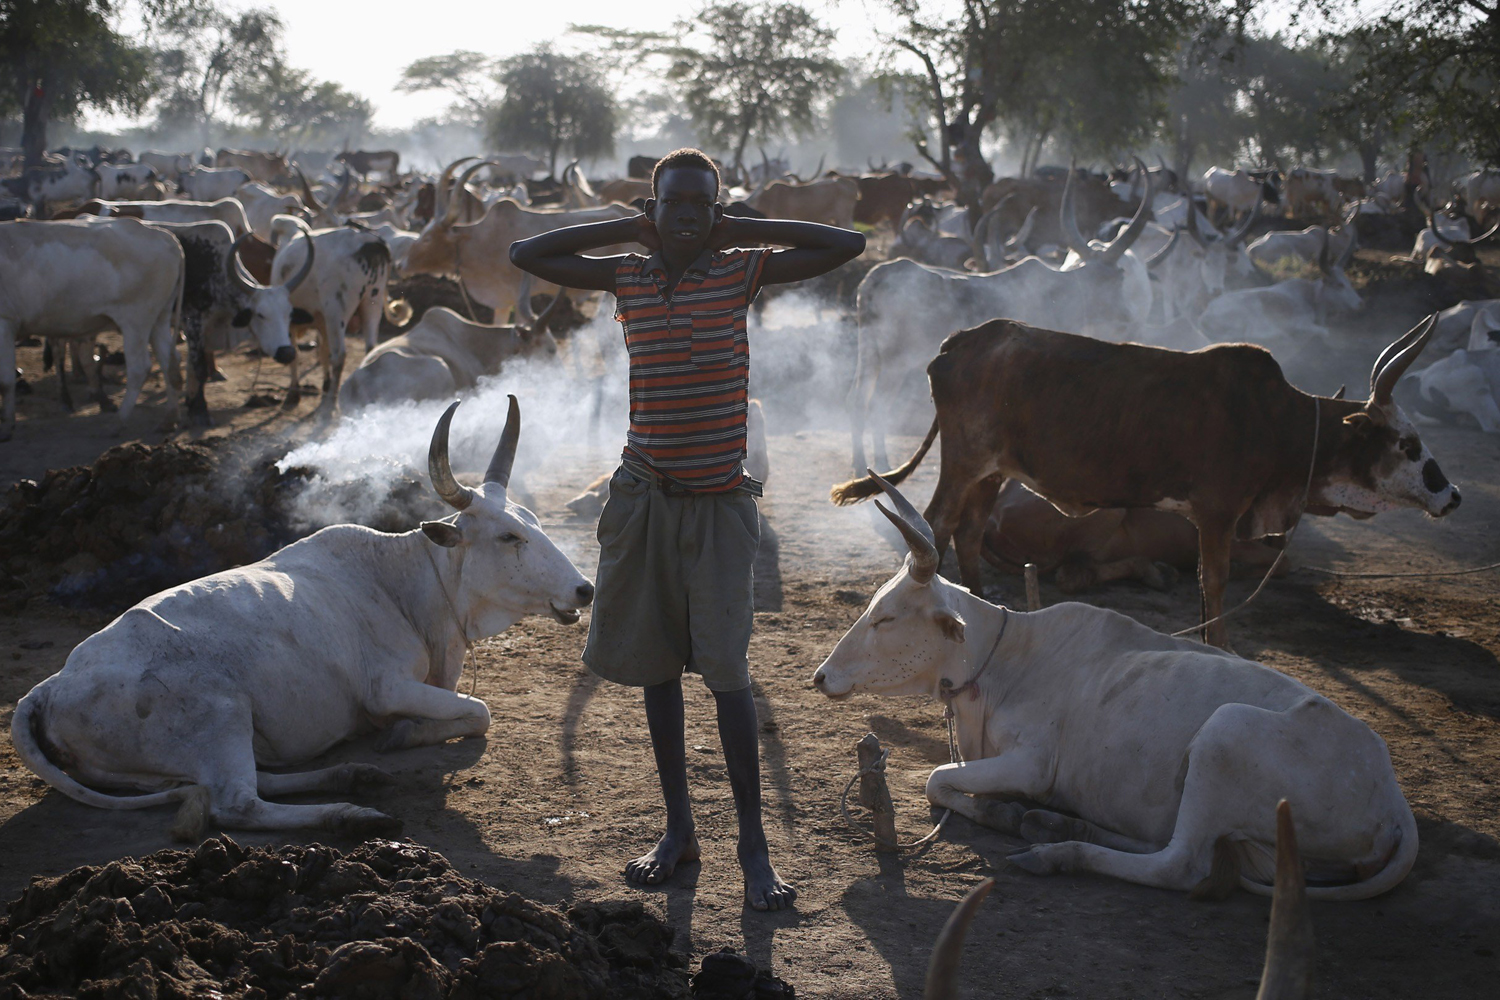 A young man from Dinka Ngok tribe stands in a cattle herders' camp near the town of Abyei